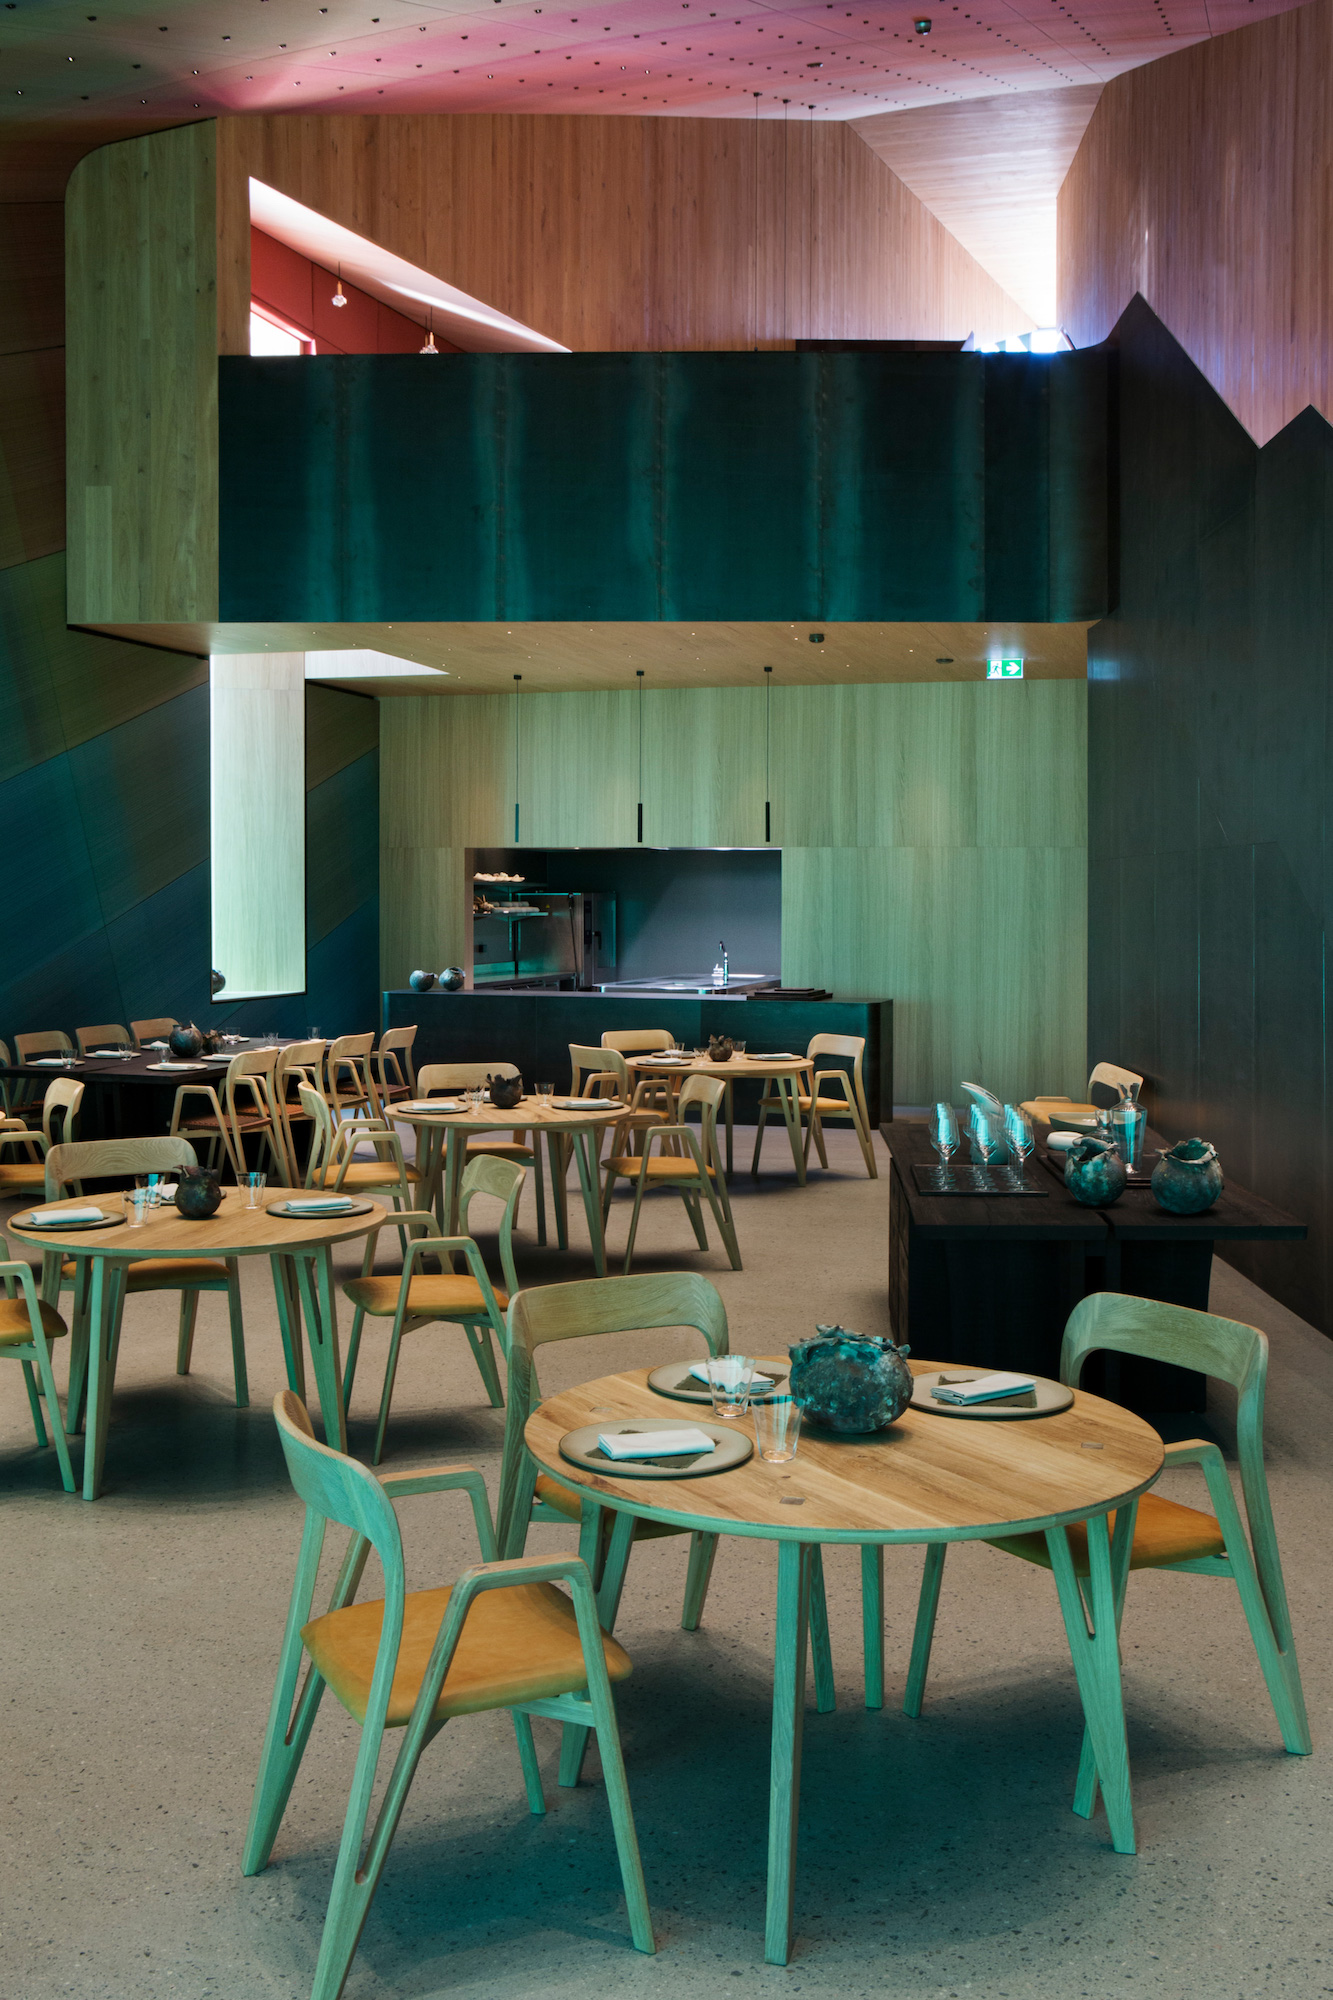 Inside the monolithic structure, the decor creates an ocean-inspired environment.